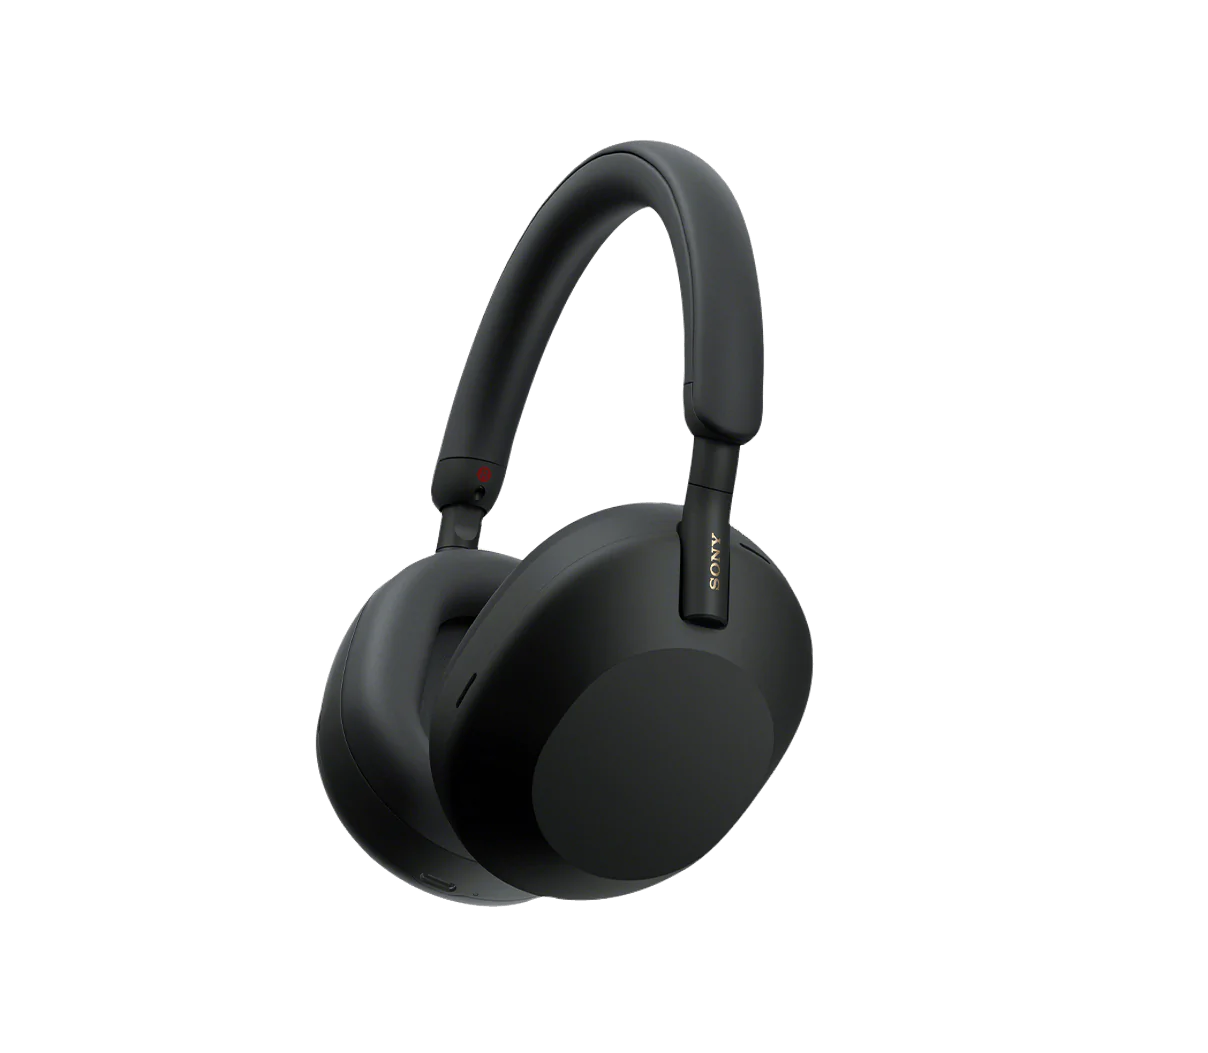 Buy WH-1000XM5 Wireless Noise Cancelling Headphones